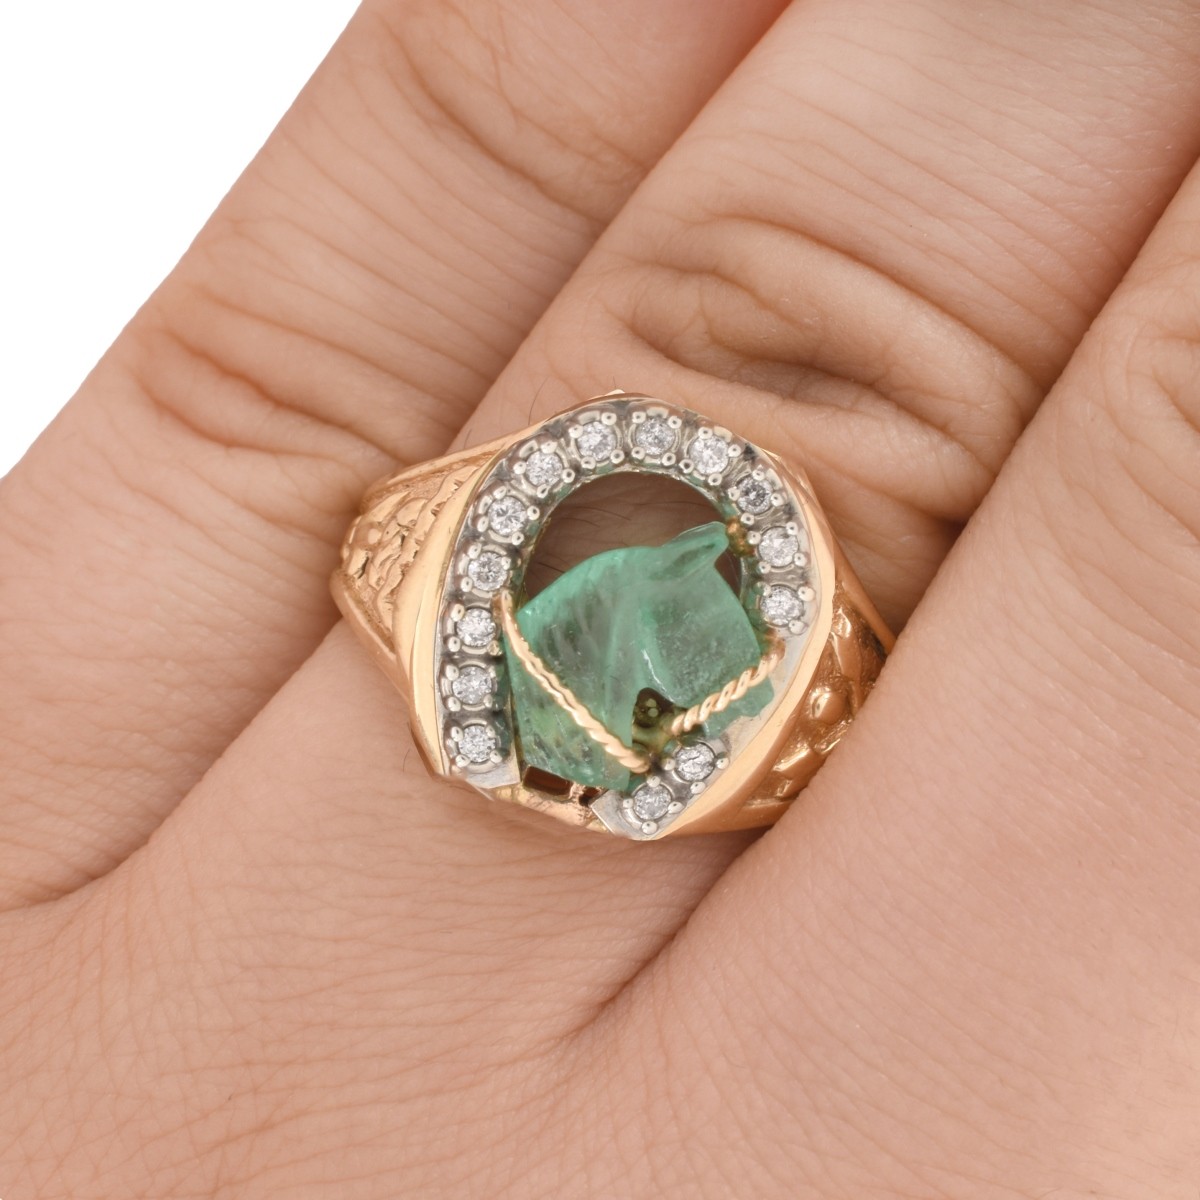 Carved Emerald, Diamond and 14K Ring